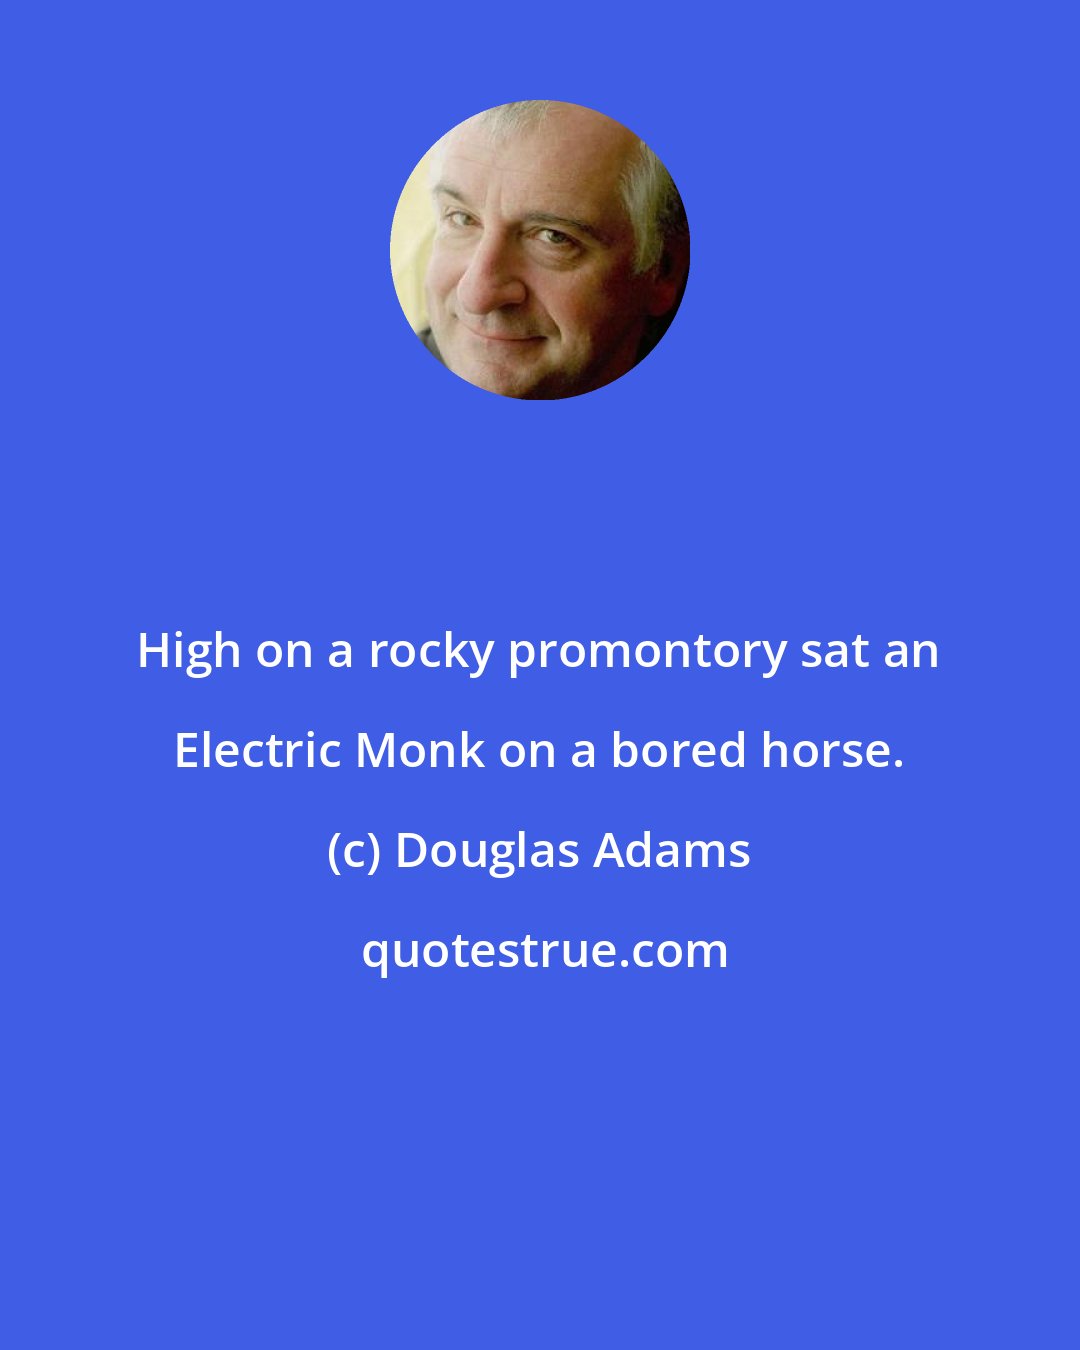 Douglas Adams: High on a rocky promontory sat an Electric Monk on a bored horse.